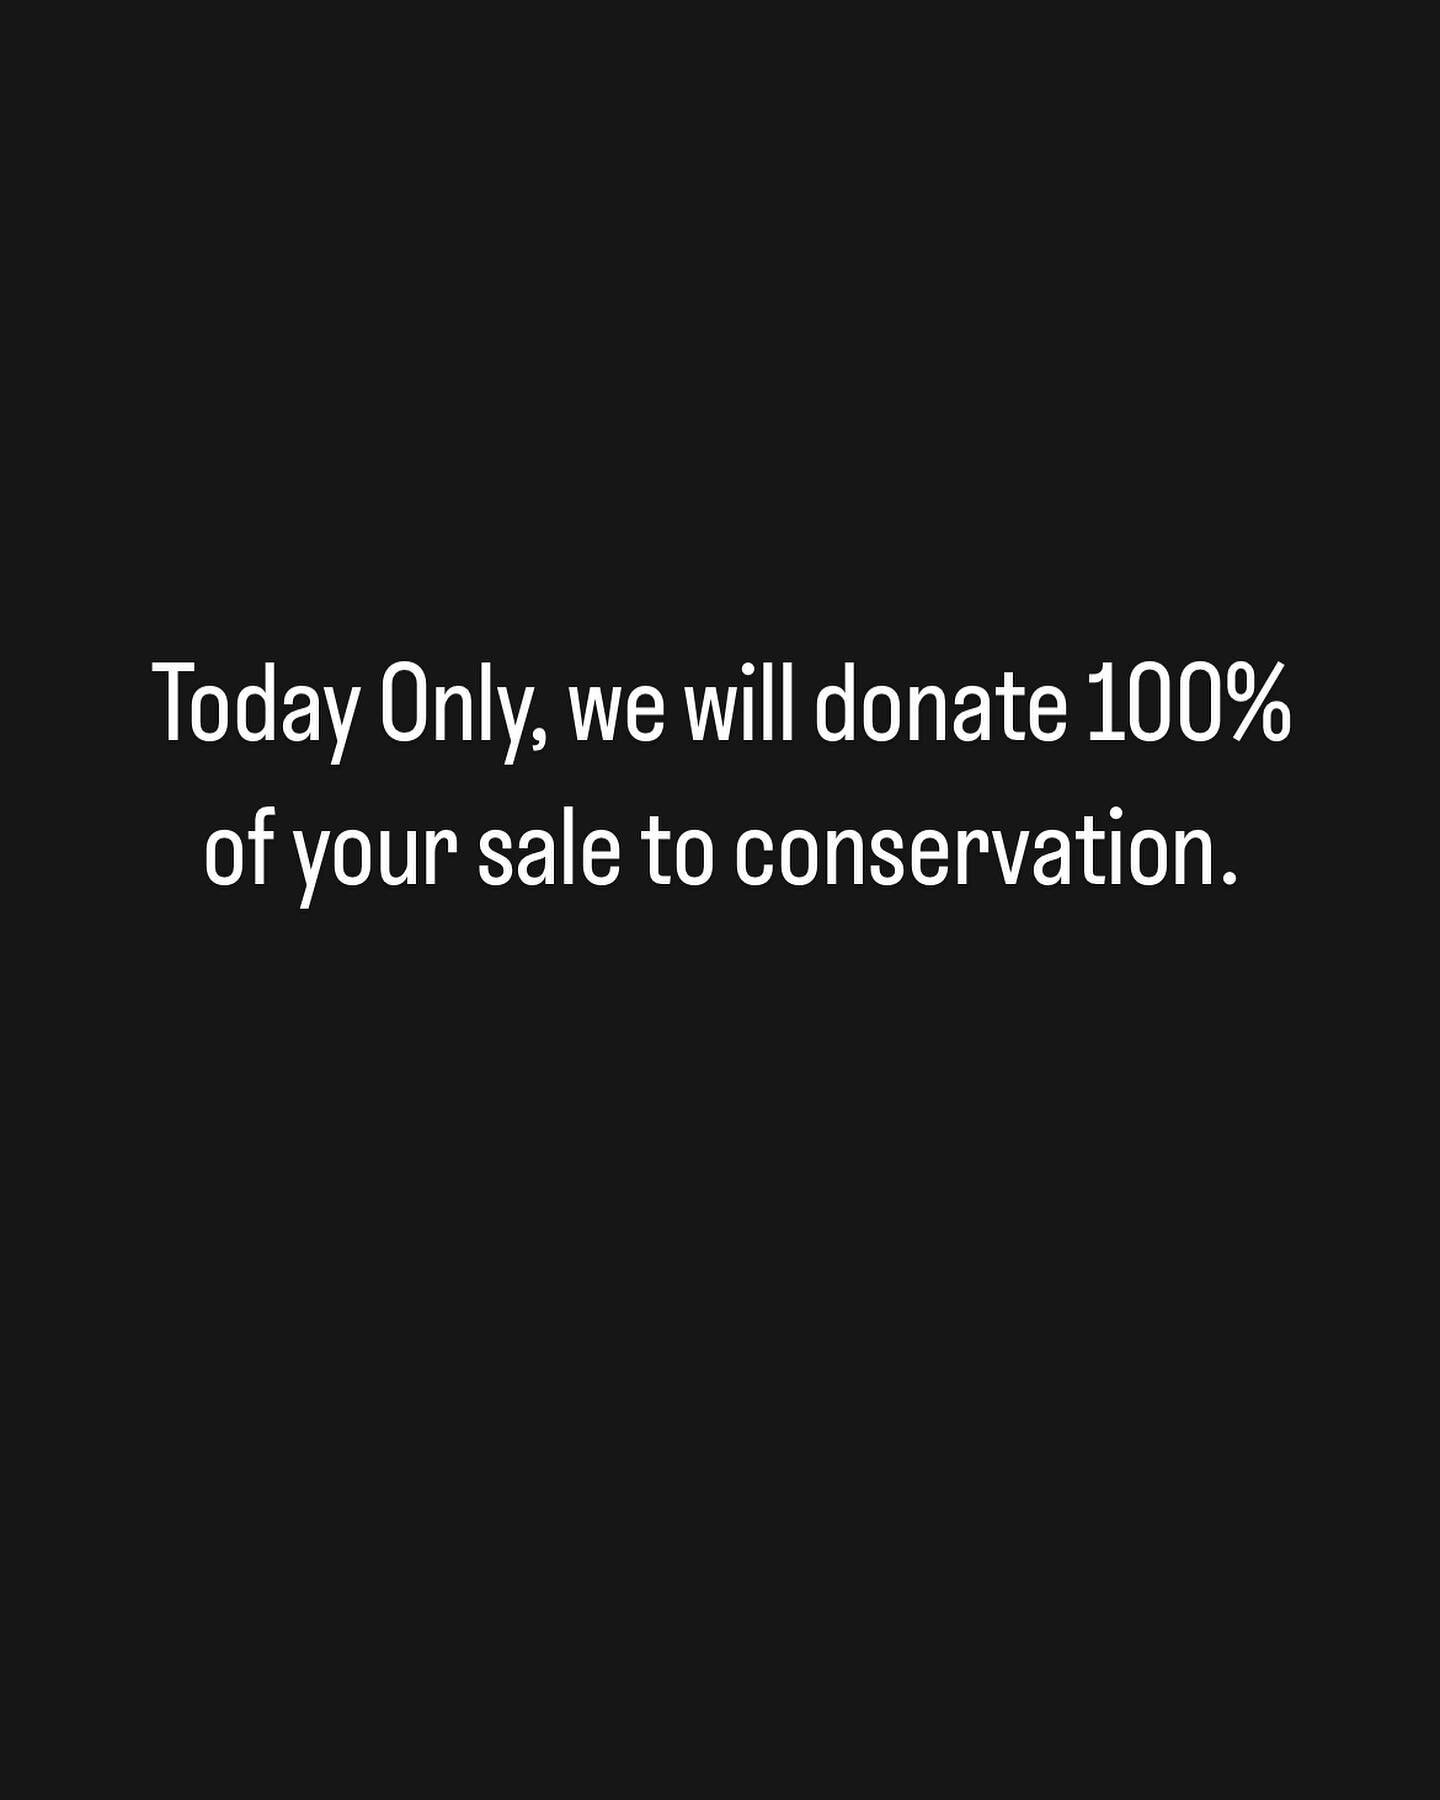 Without wild fish and wild places, life would look a lot different. We are donating all sales to conservation today. If you purchase an item we will donate to @henrysforkfoundation @wildsteelheadcoalition @native_fish_society or the conservation grou